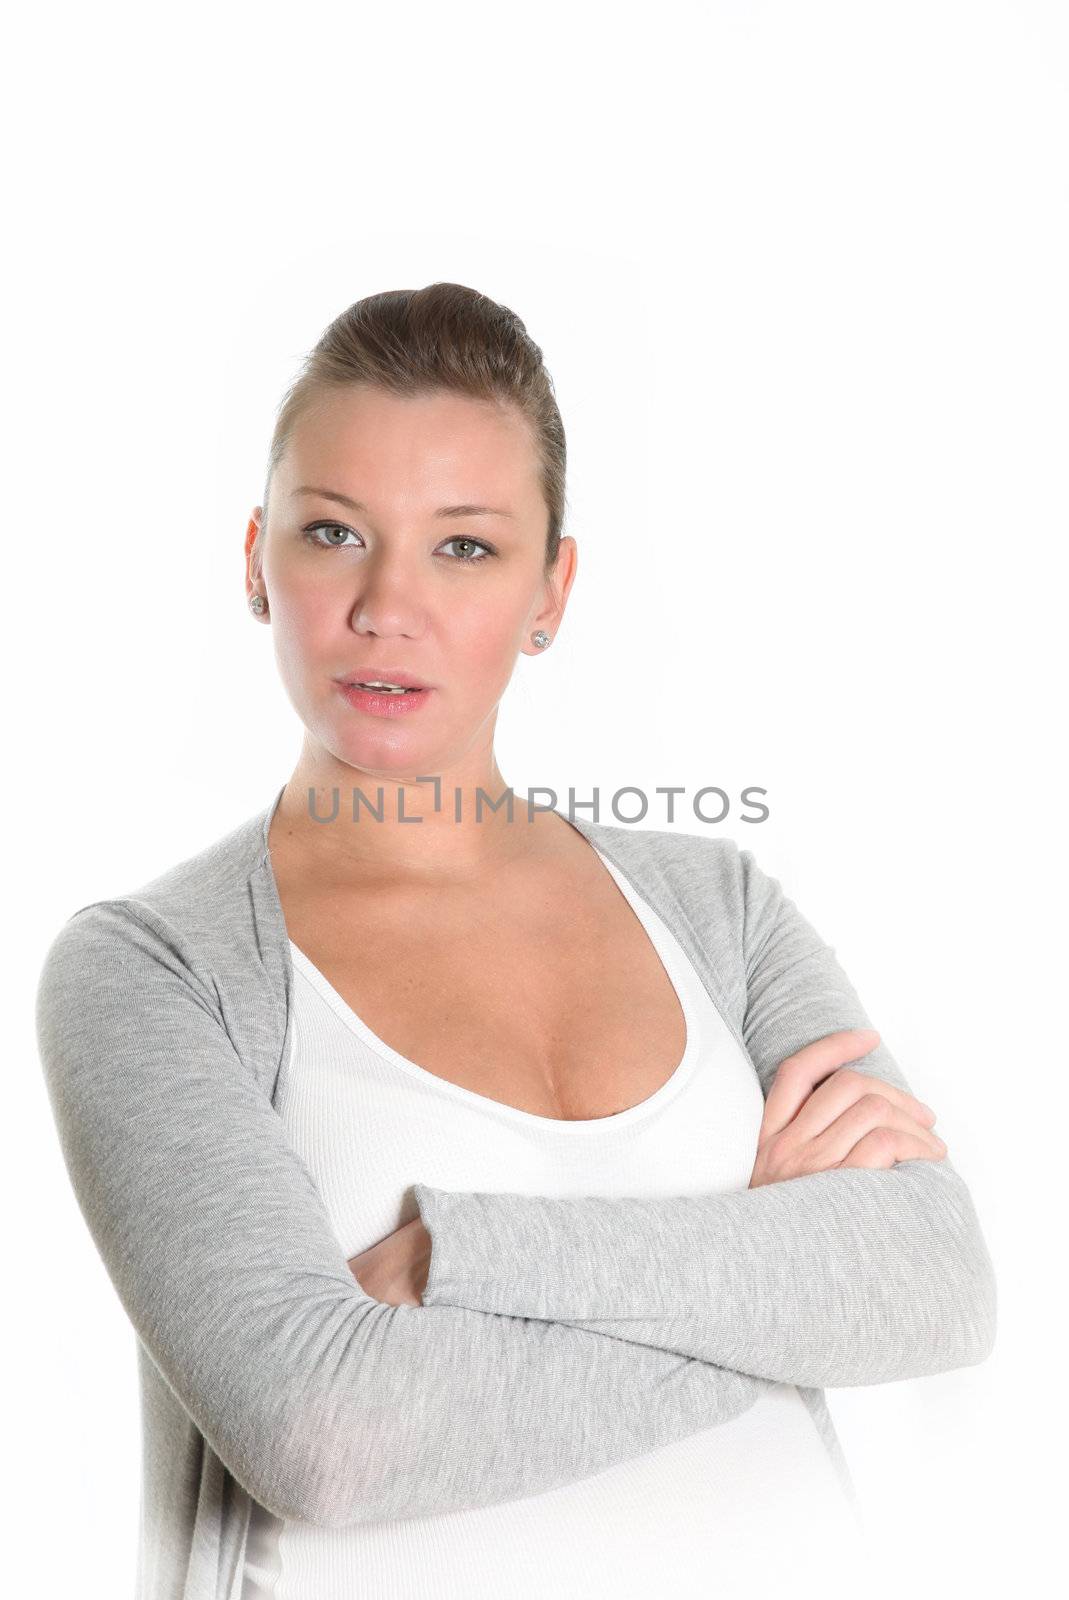 portrait of a surprised and questioning woman with arms crossed in front of white background.
 